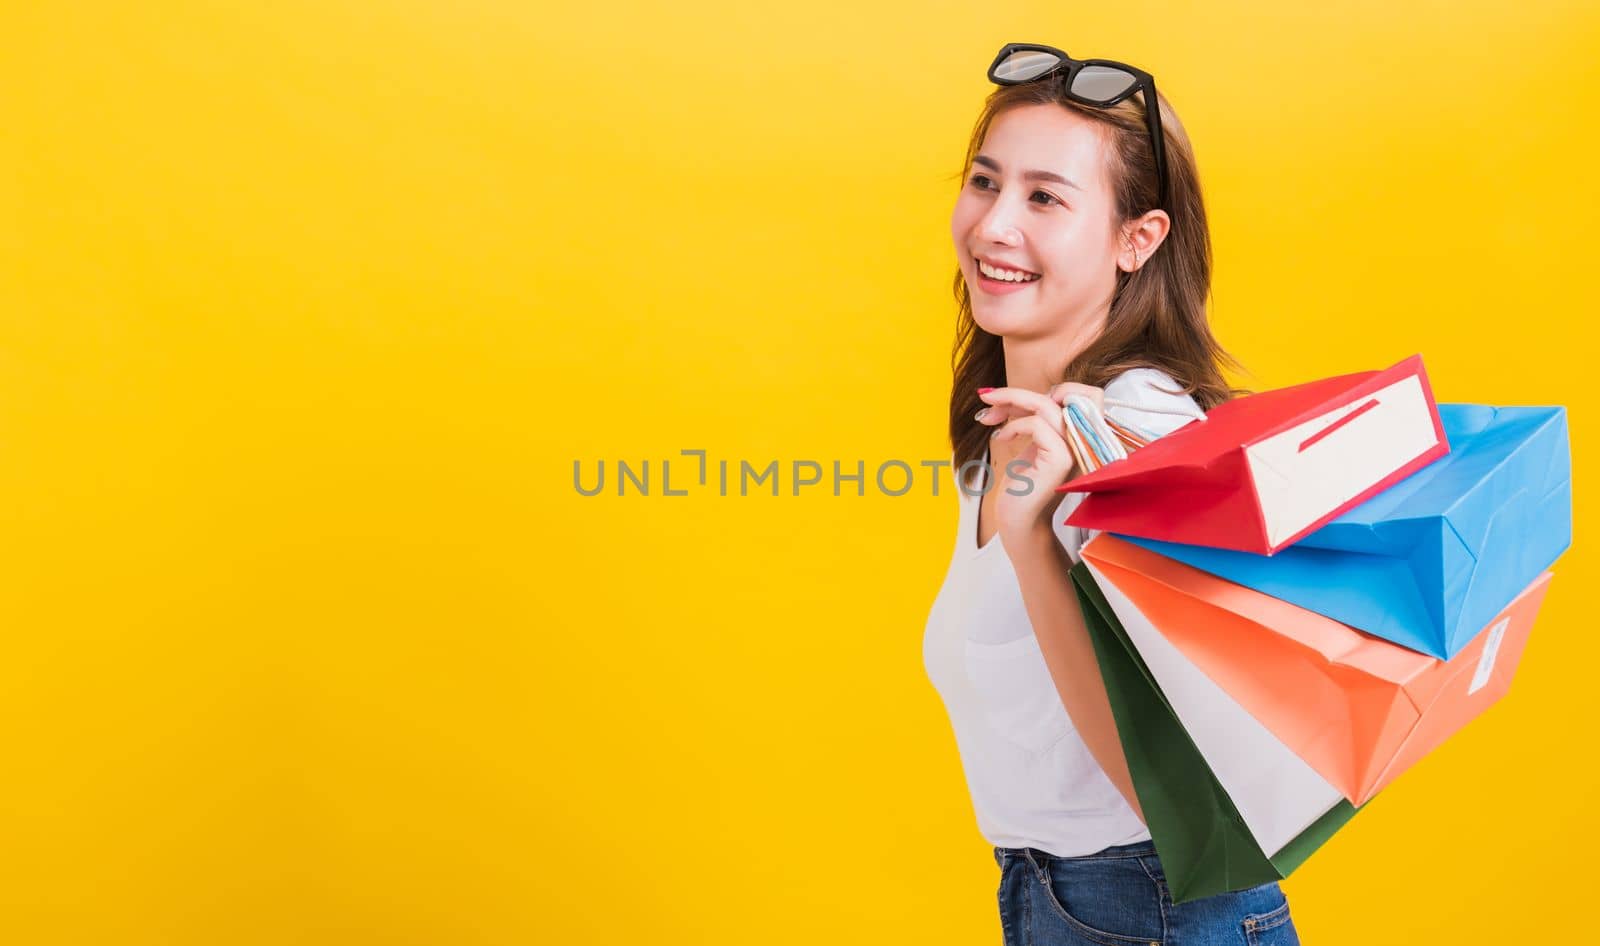 woman teen smiling standing with sunglasses excited holding shopping bags multi color by Sorapop